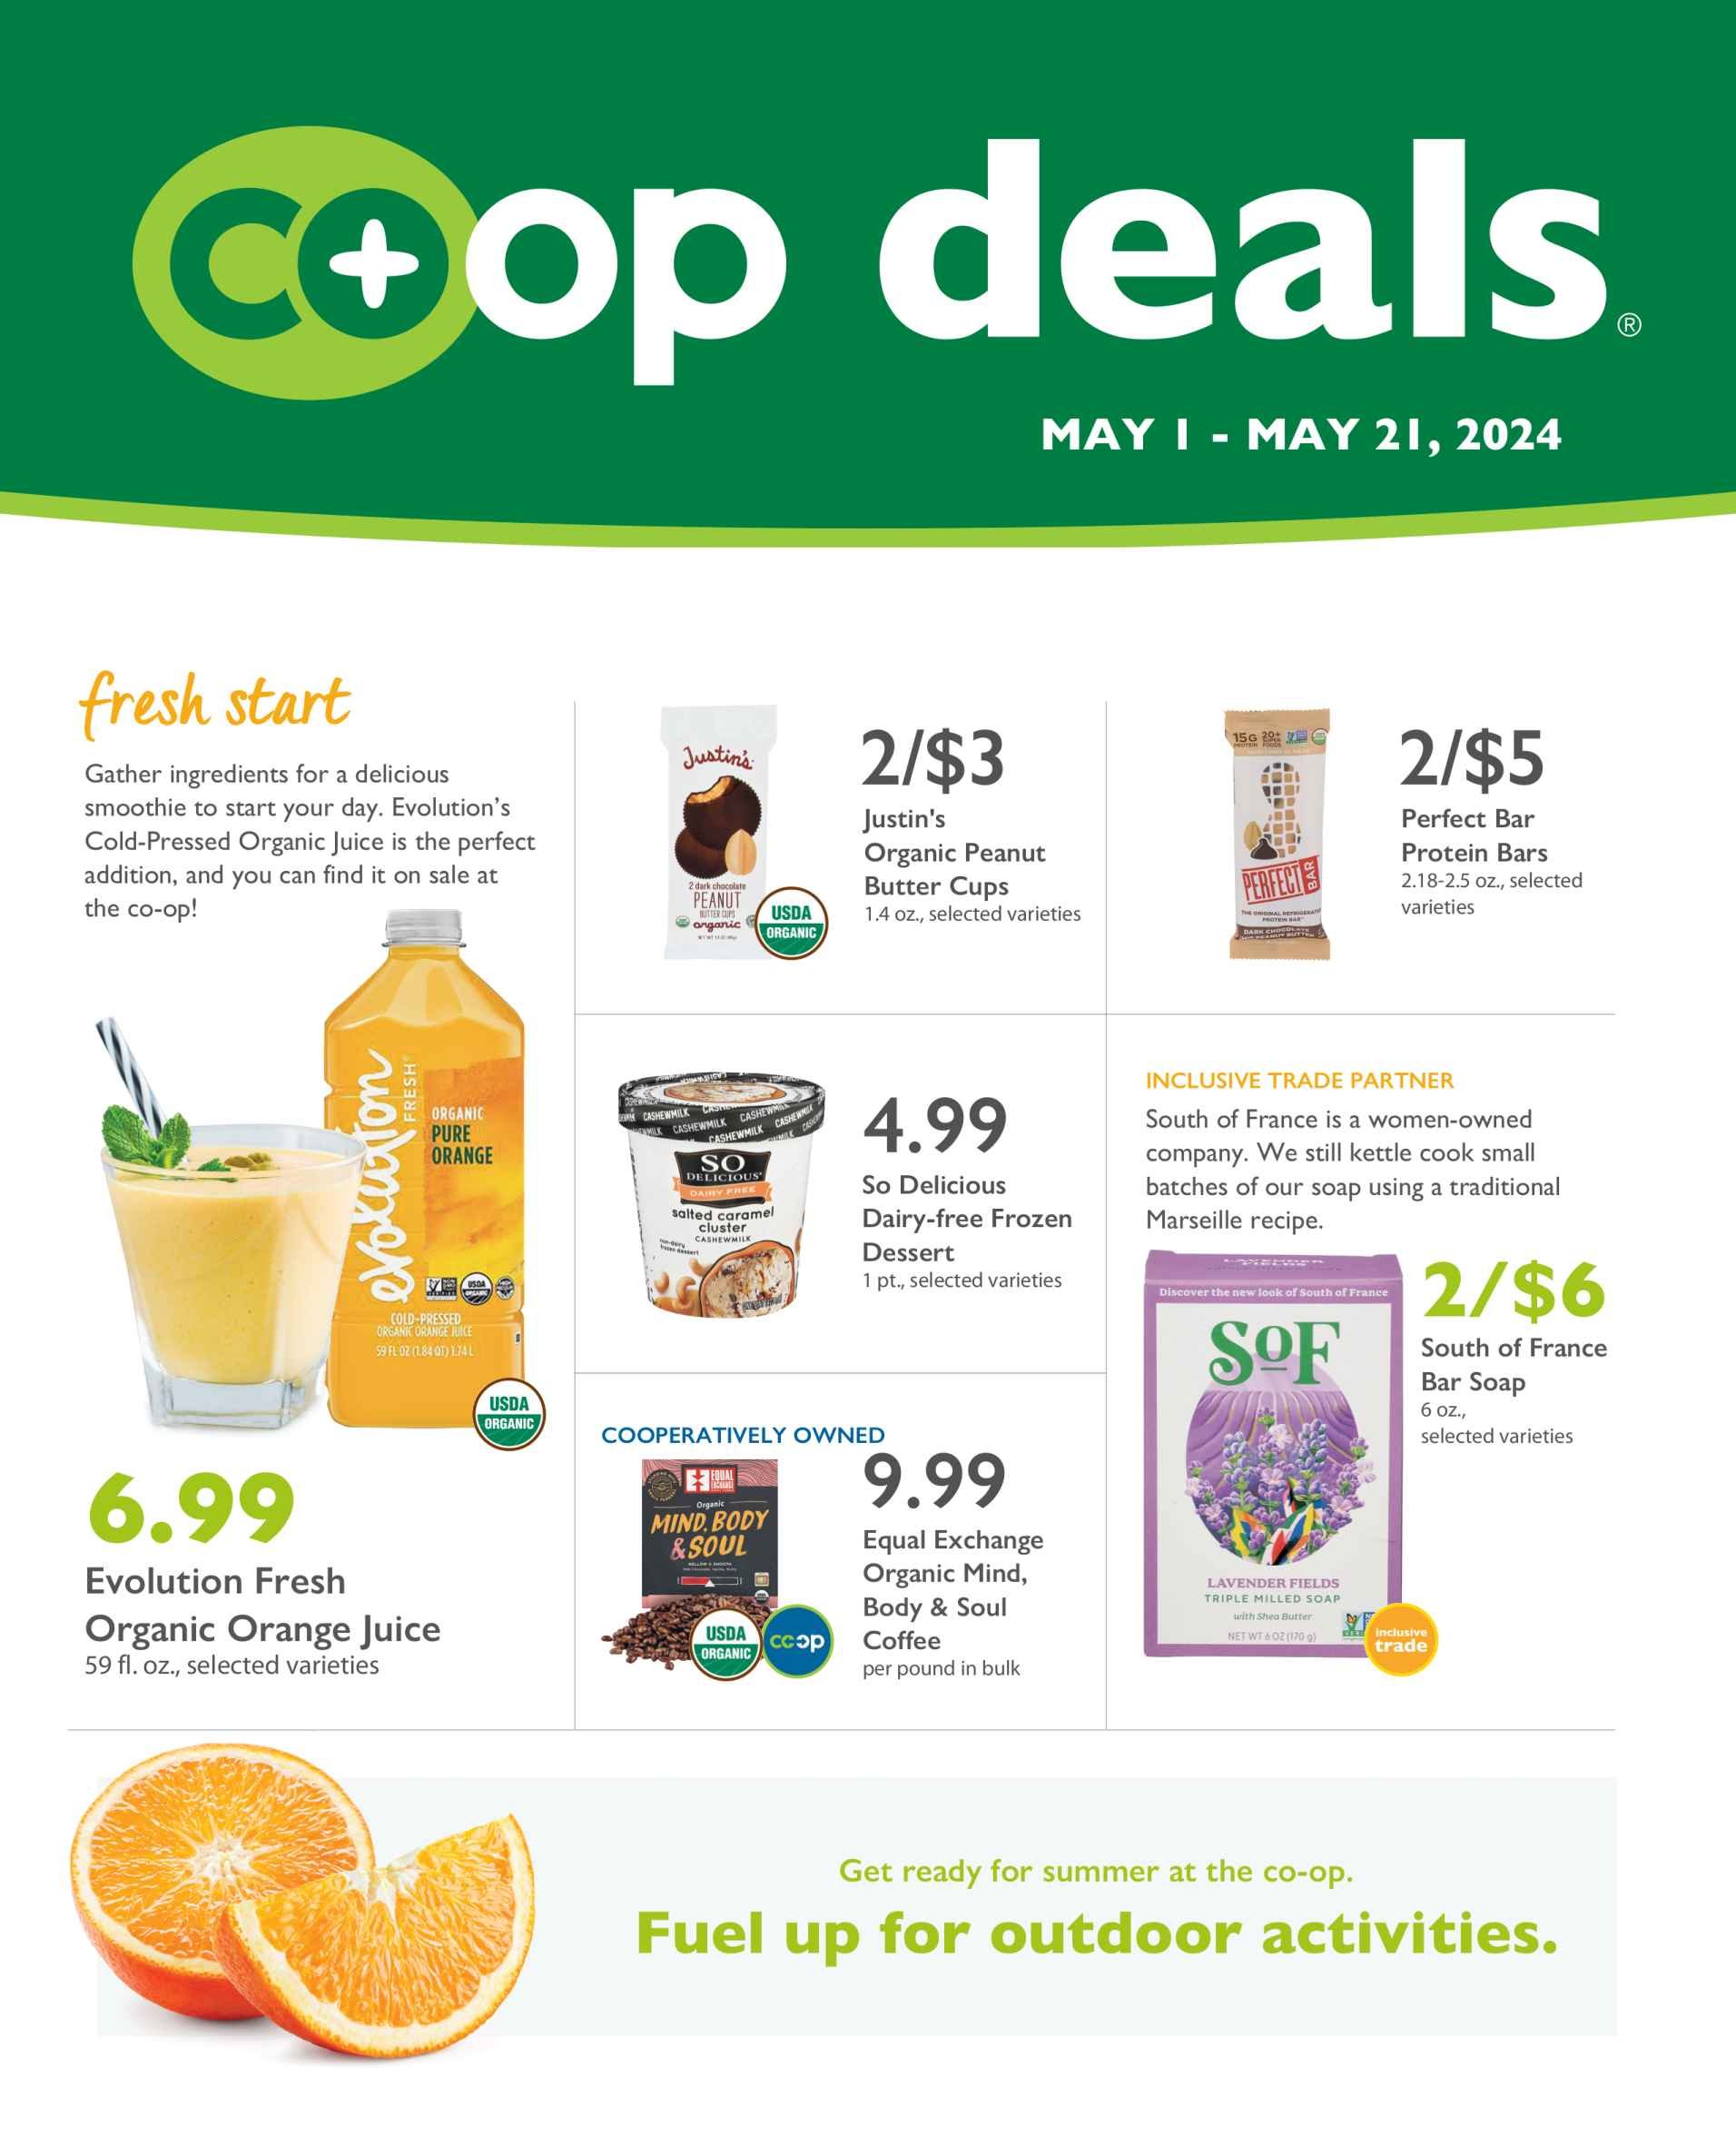 Co+op_Deals_2024_May_Flyer_East_A_Page (1).jpg